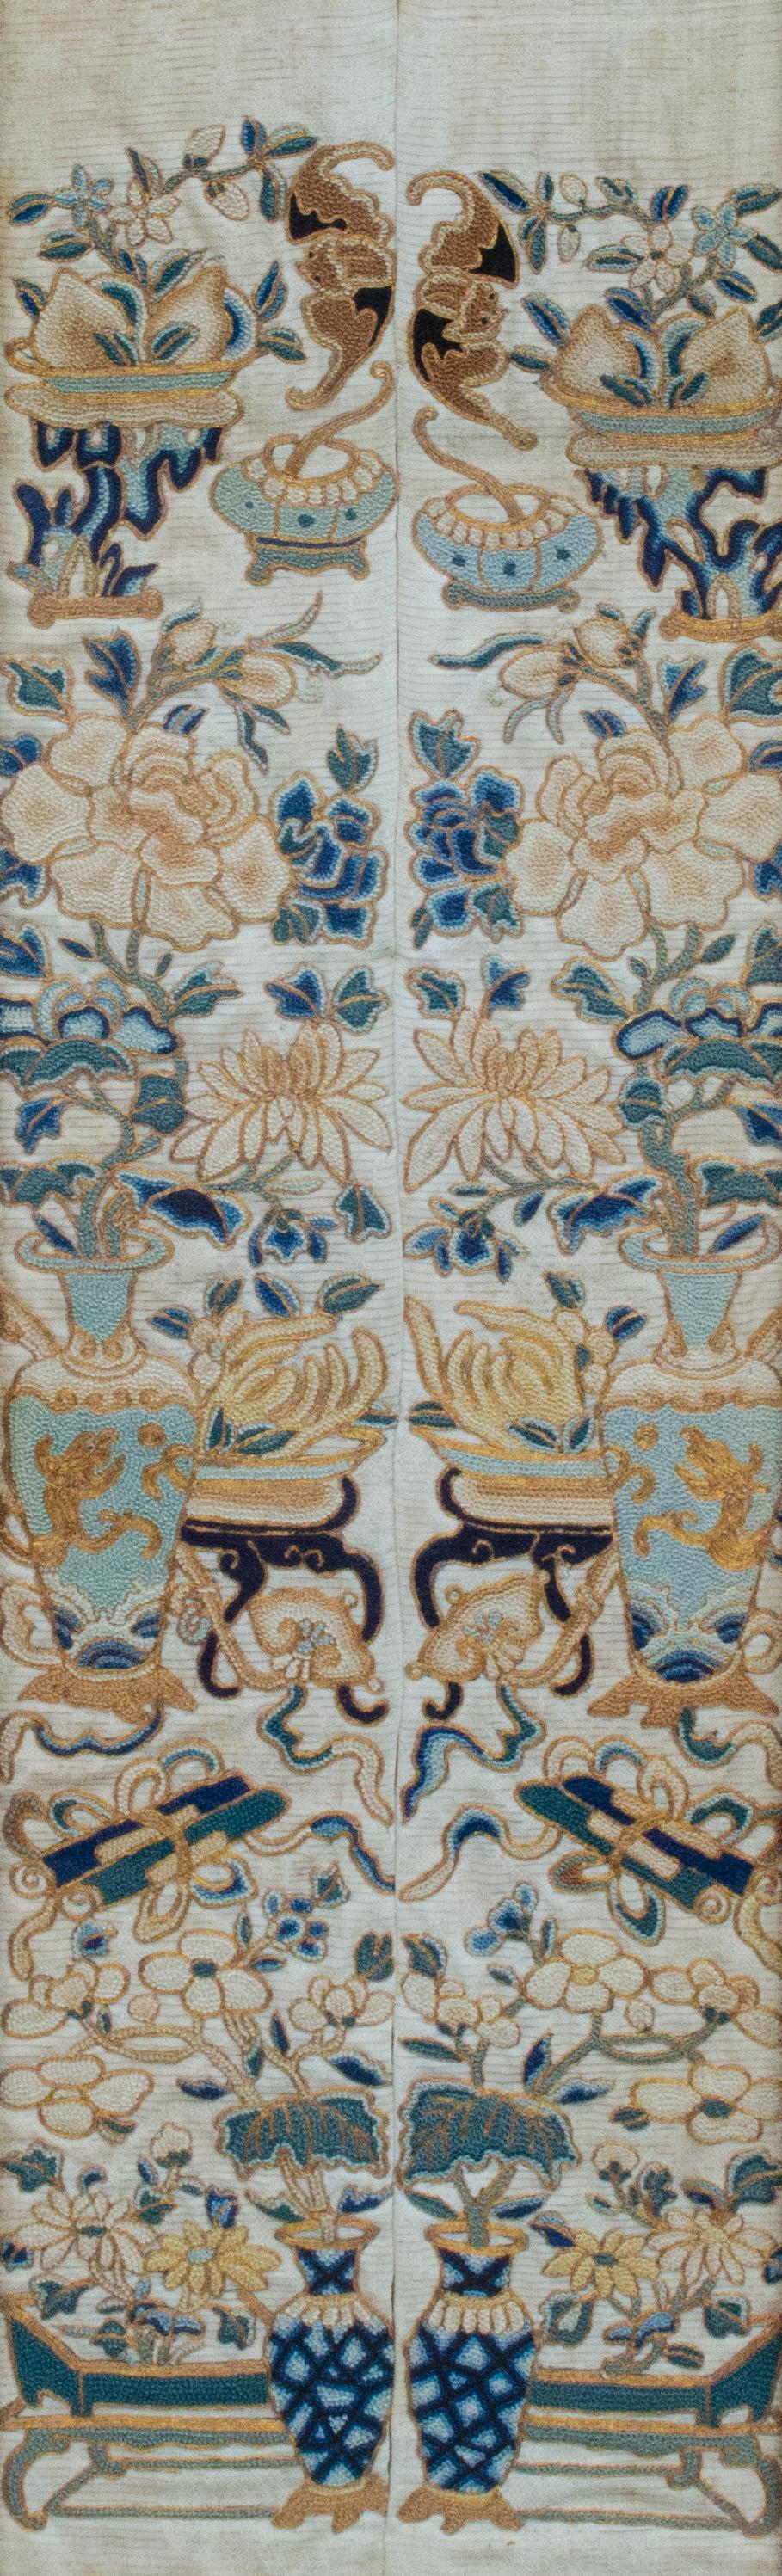 Qing Dynasty Embroidered Textile - Art by Unknown